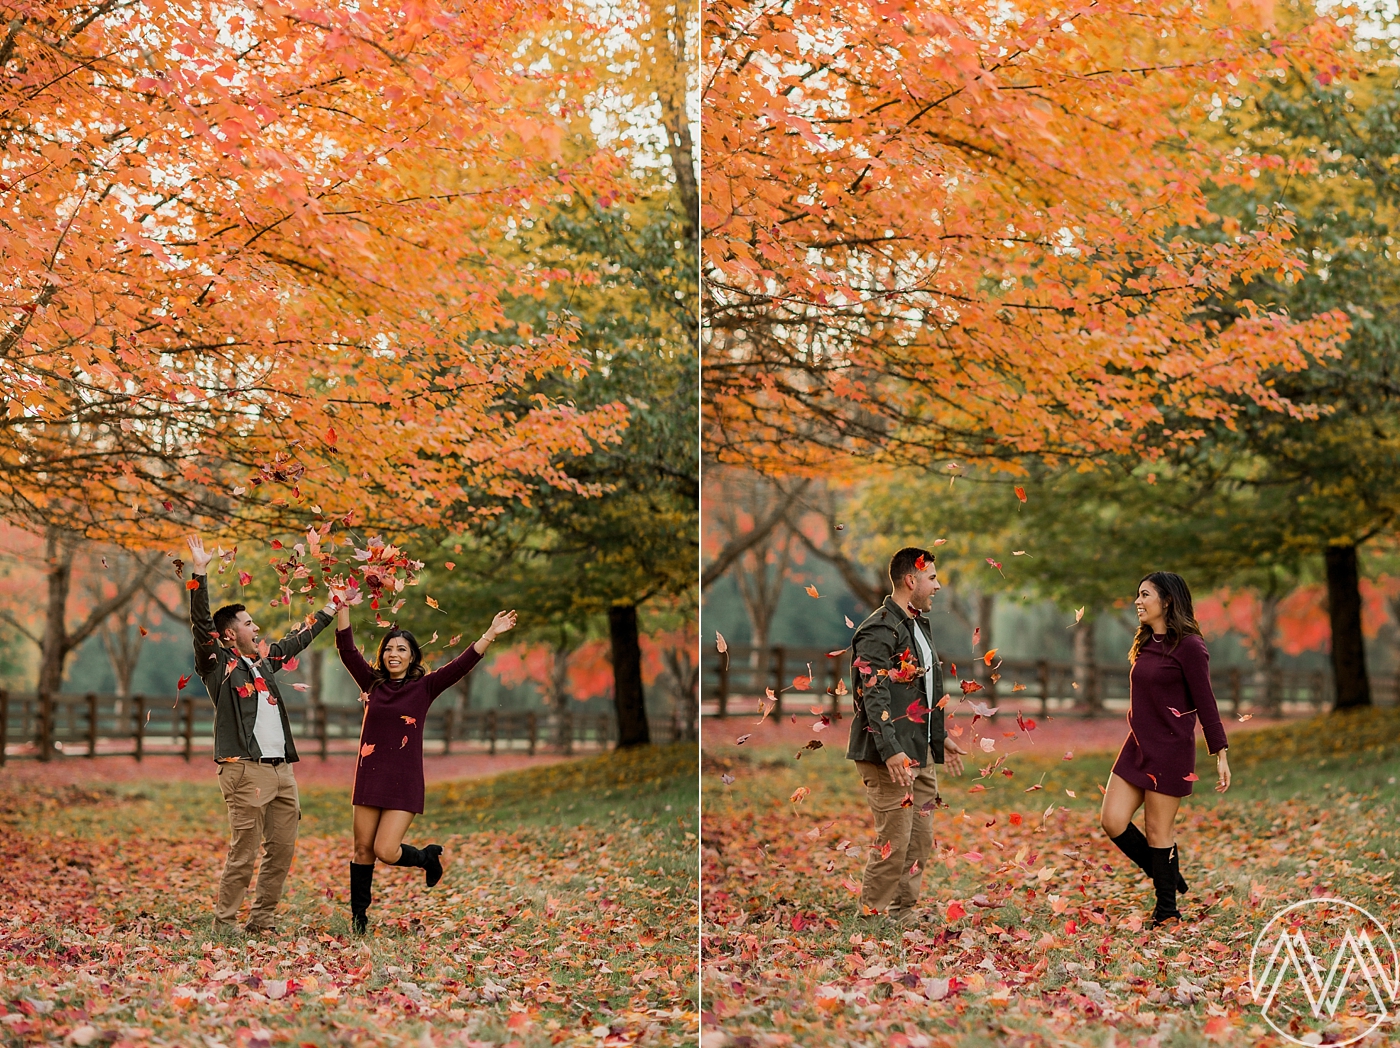 North Bend Engagement Session after proposal | Megan Montalvo Photography